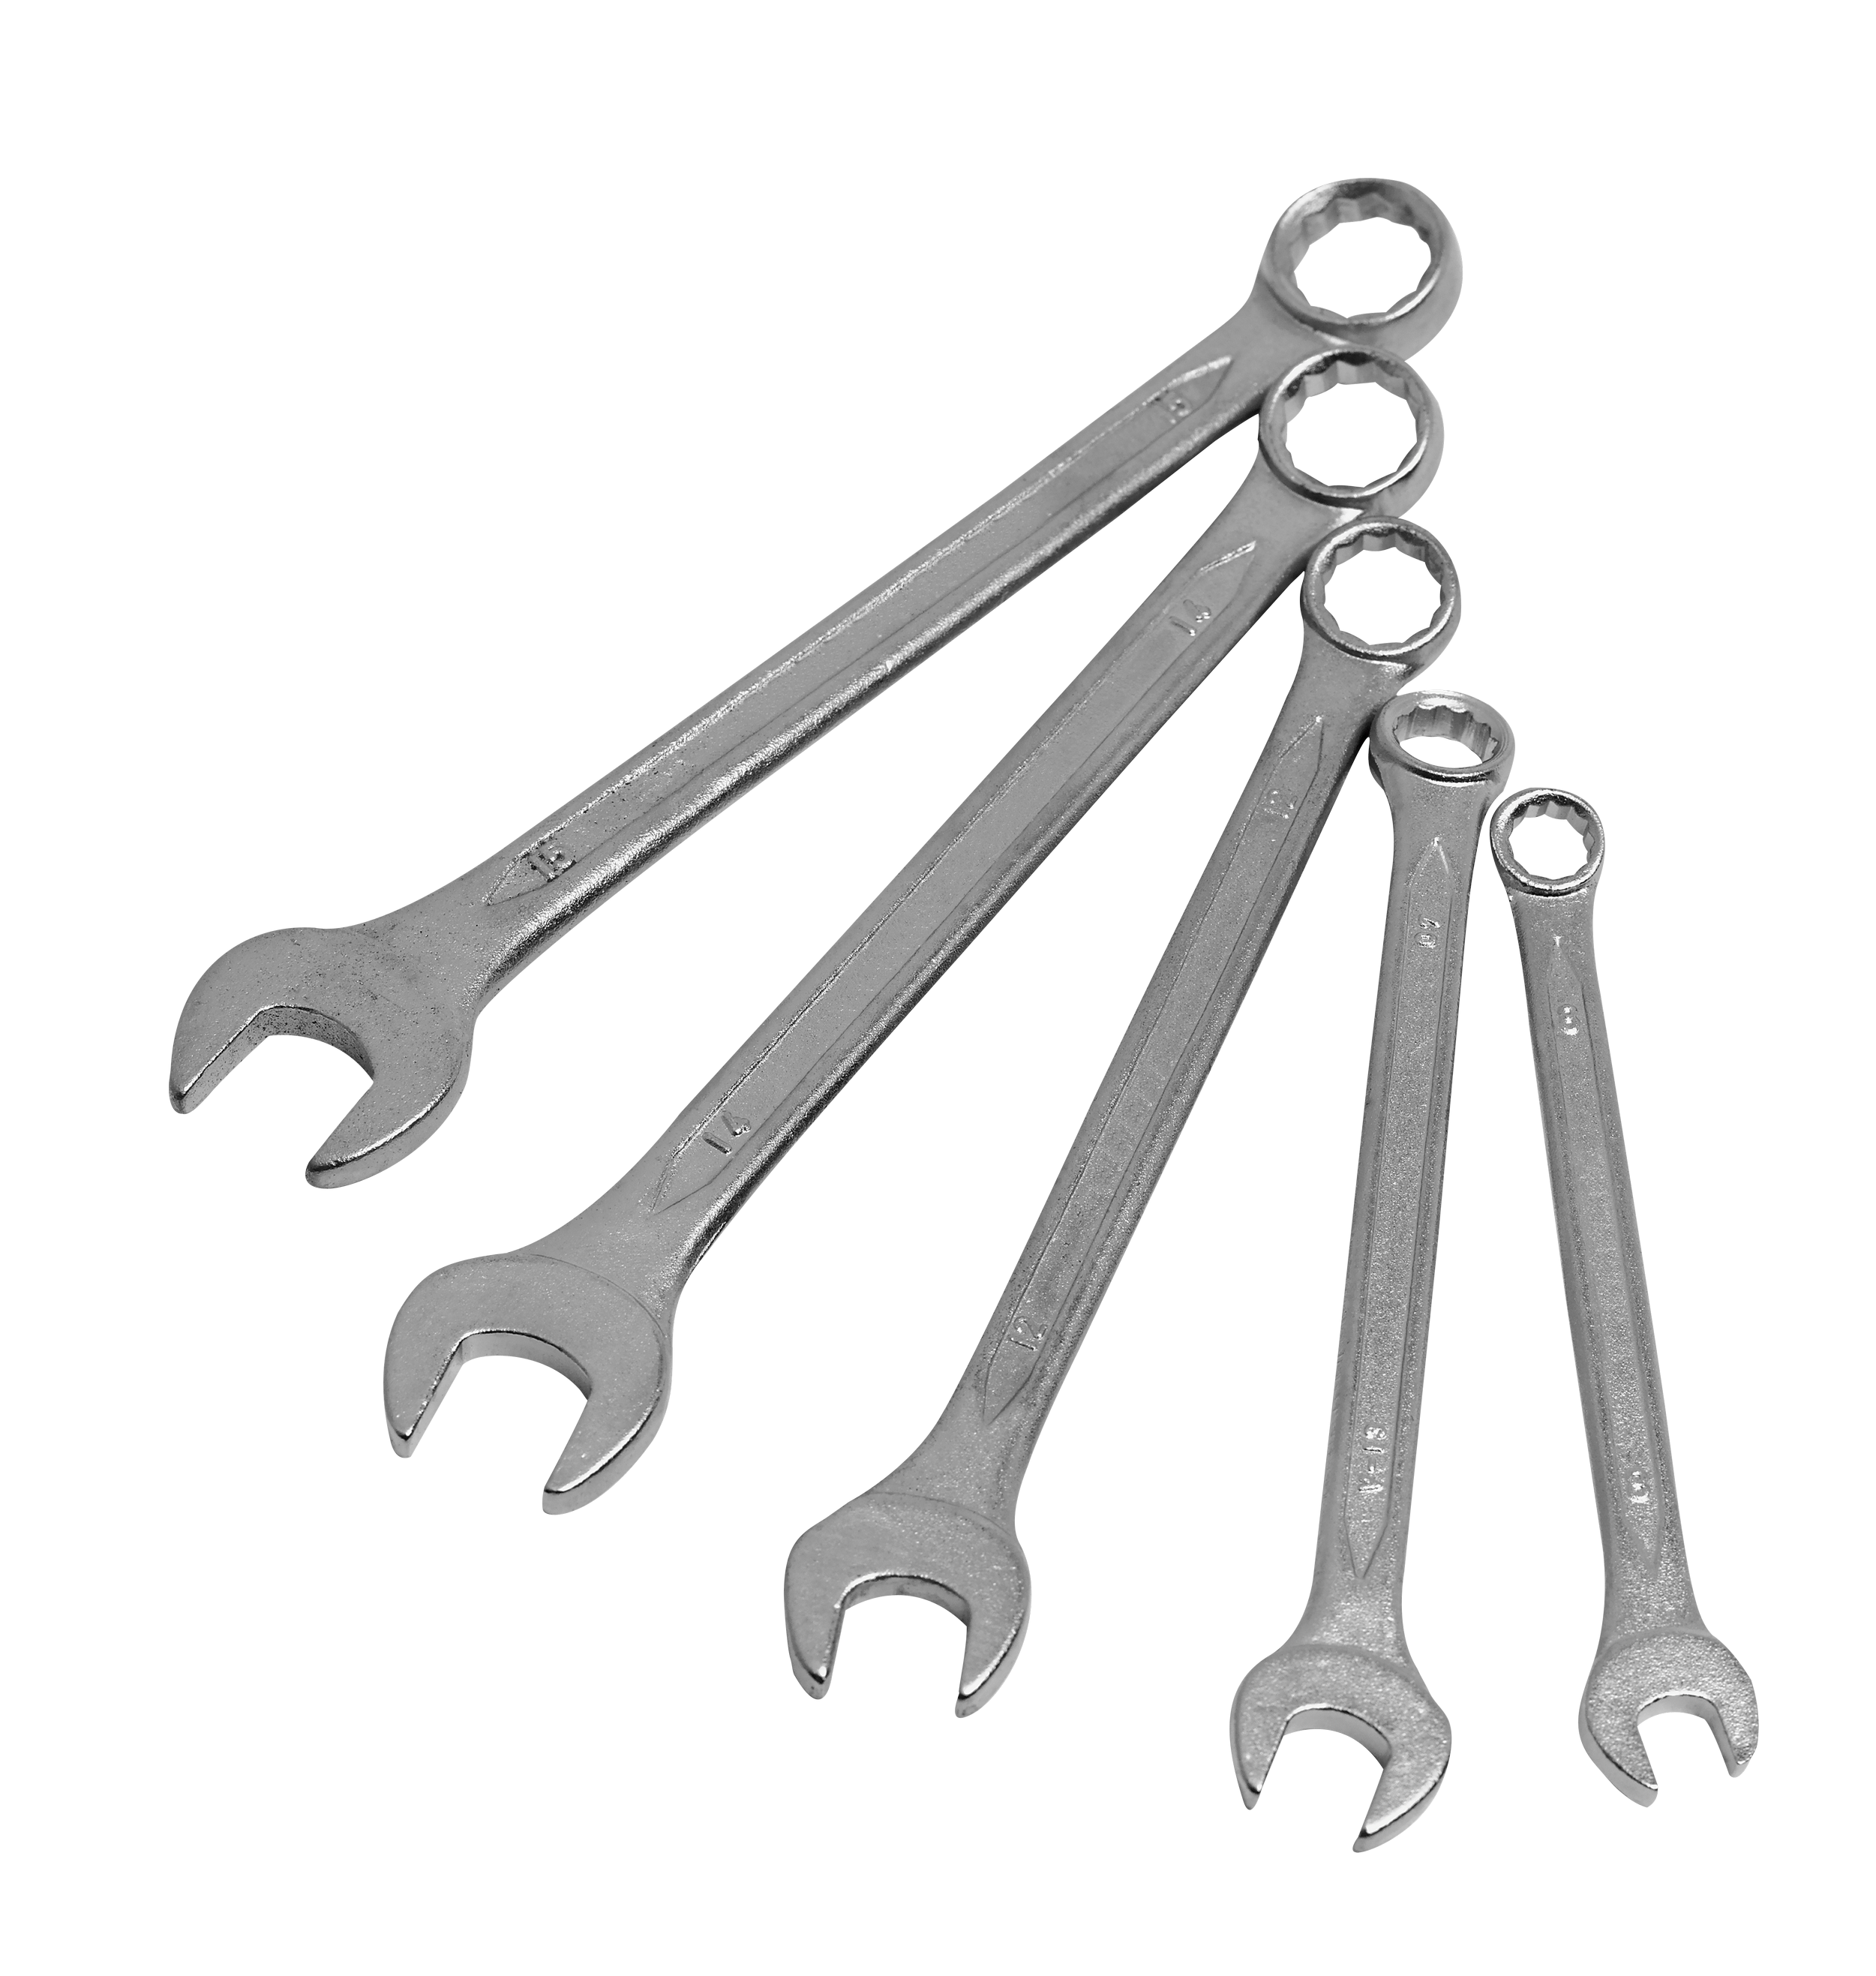 Wrench PNG Images pngteam.com